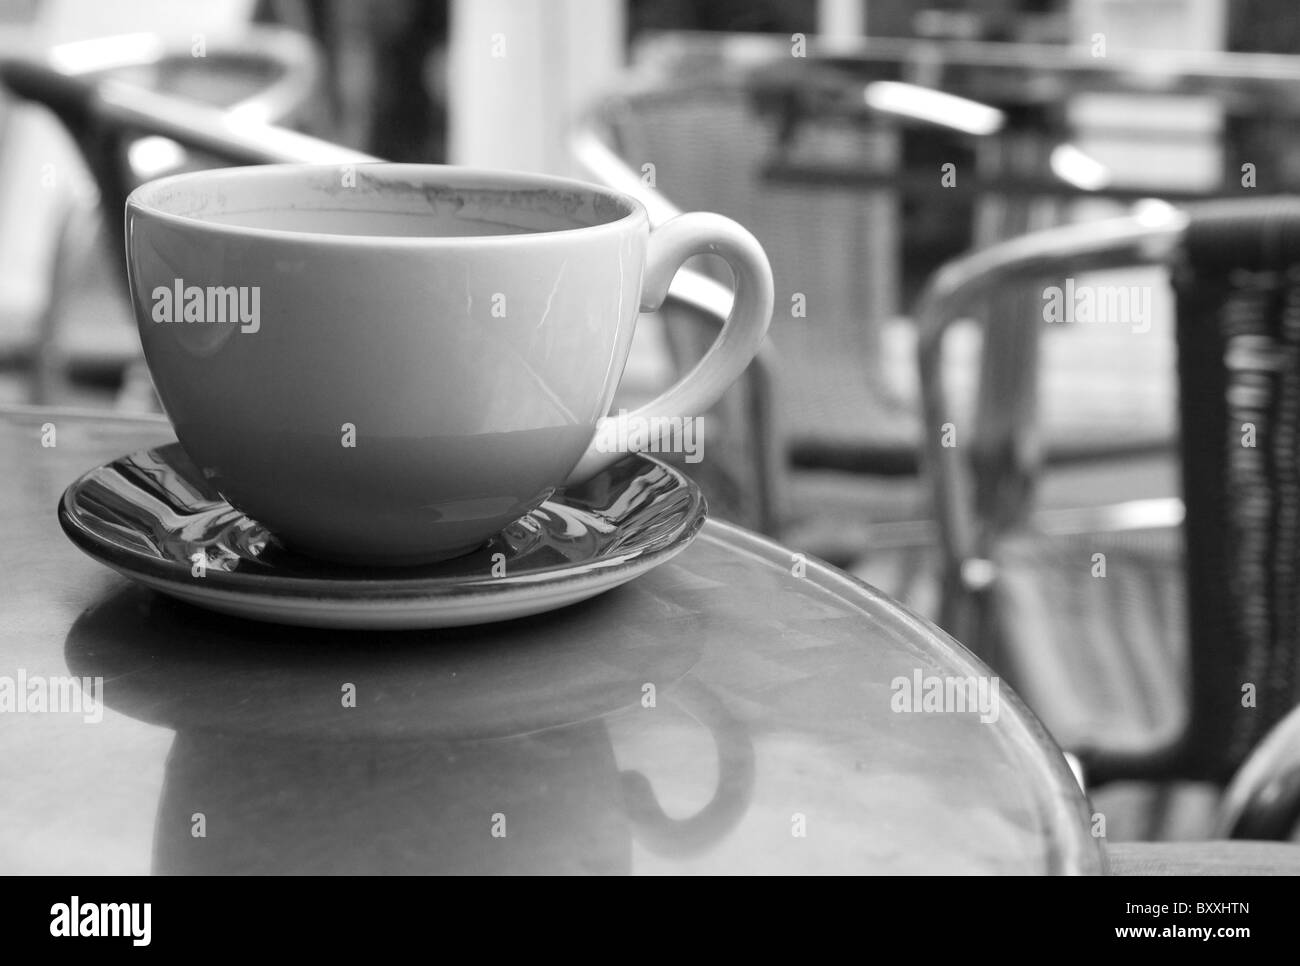 Coffe cup in a cafe Stock Photo